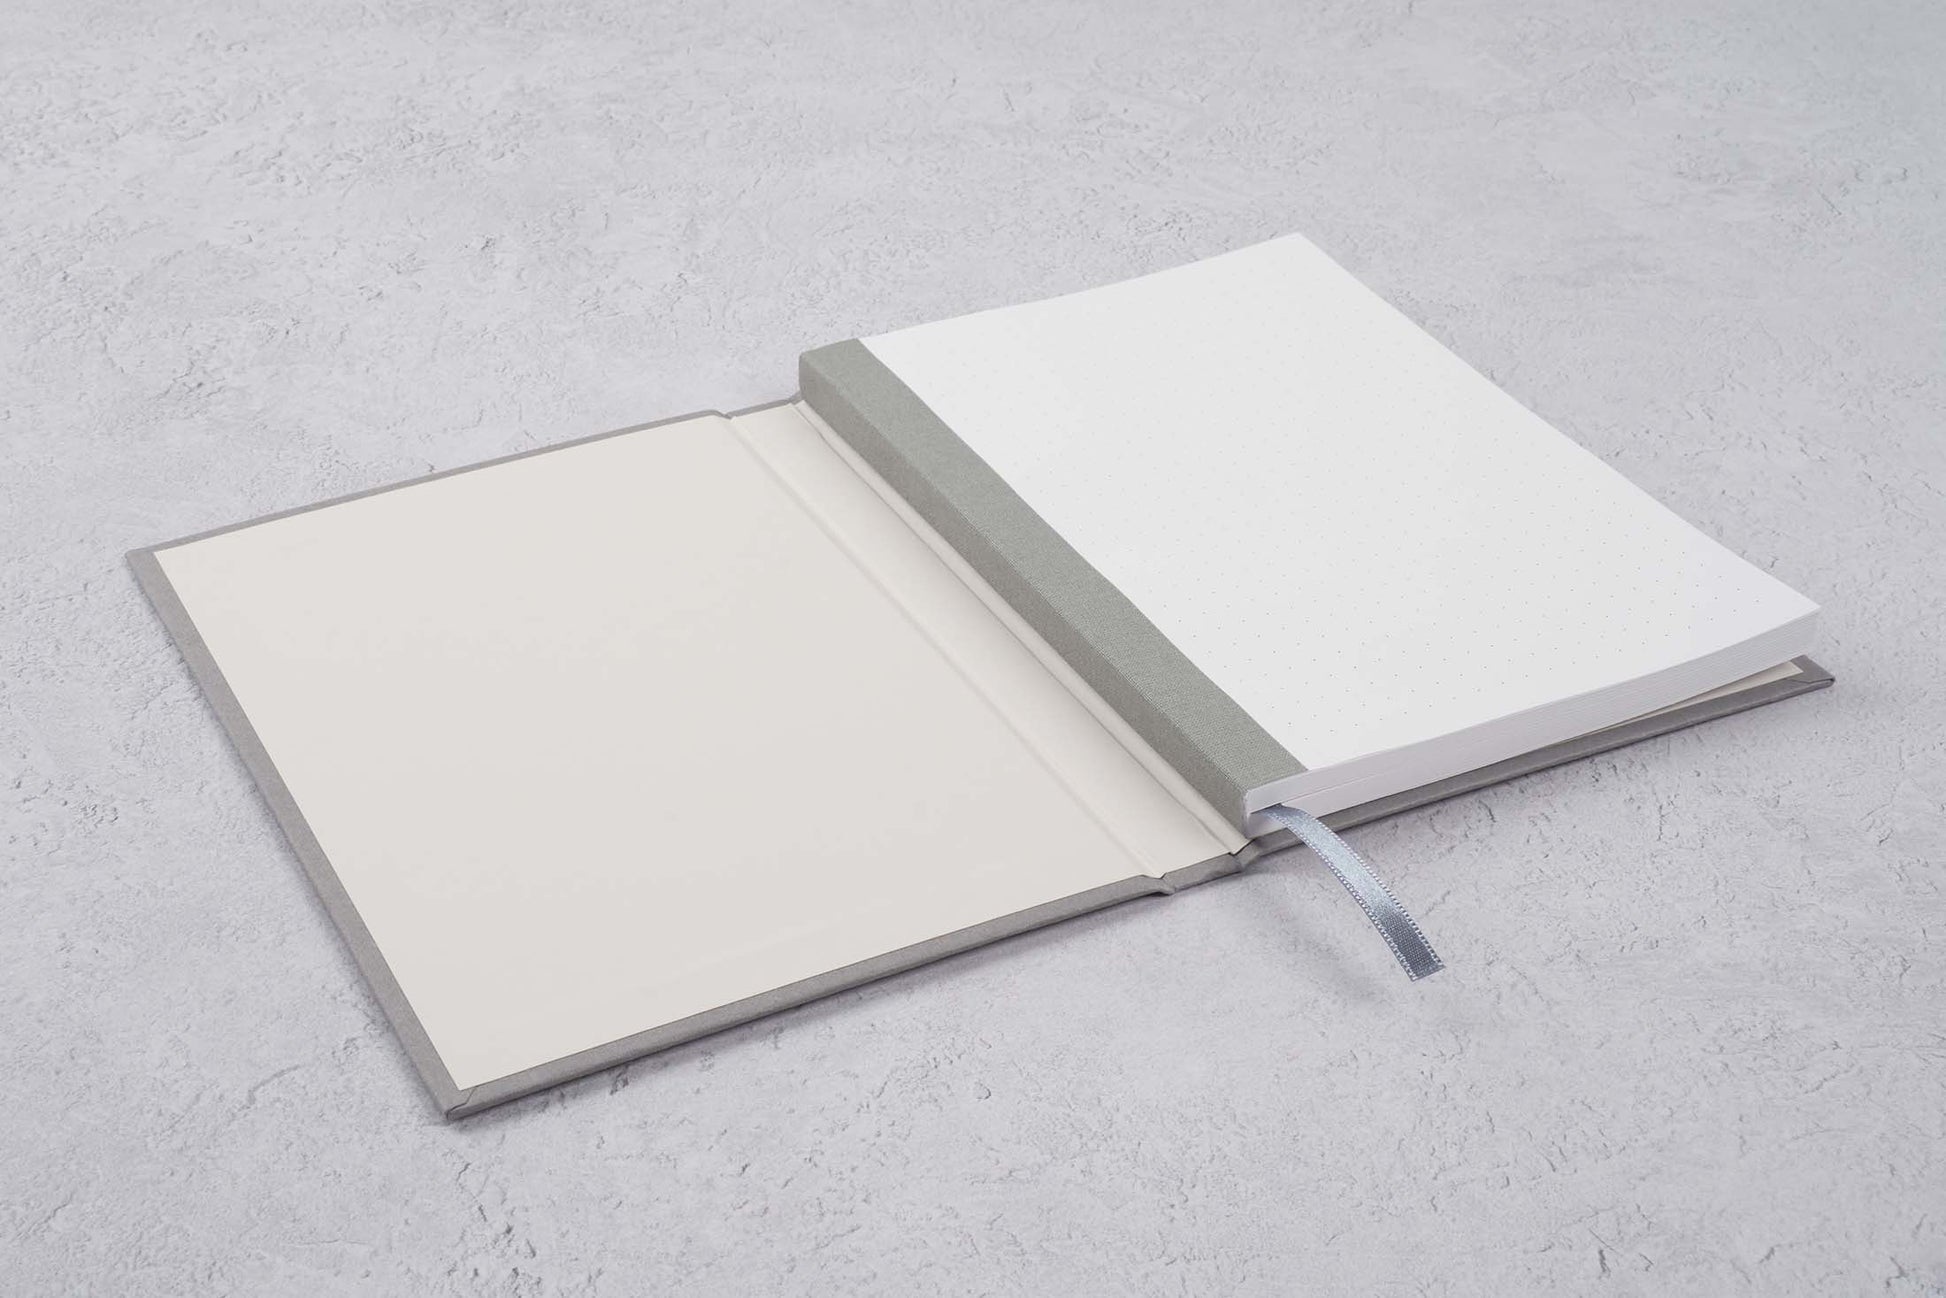 gray blocker paper notebook open showing the Swiss binding and dot grid pages. fountain pen friendly notebook open on a gray background